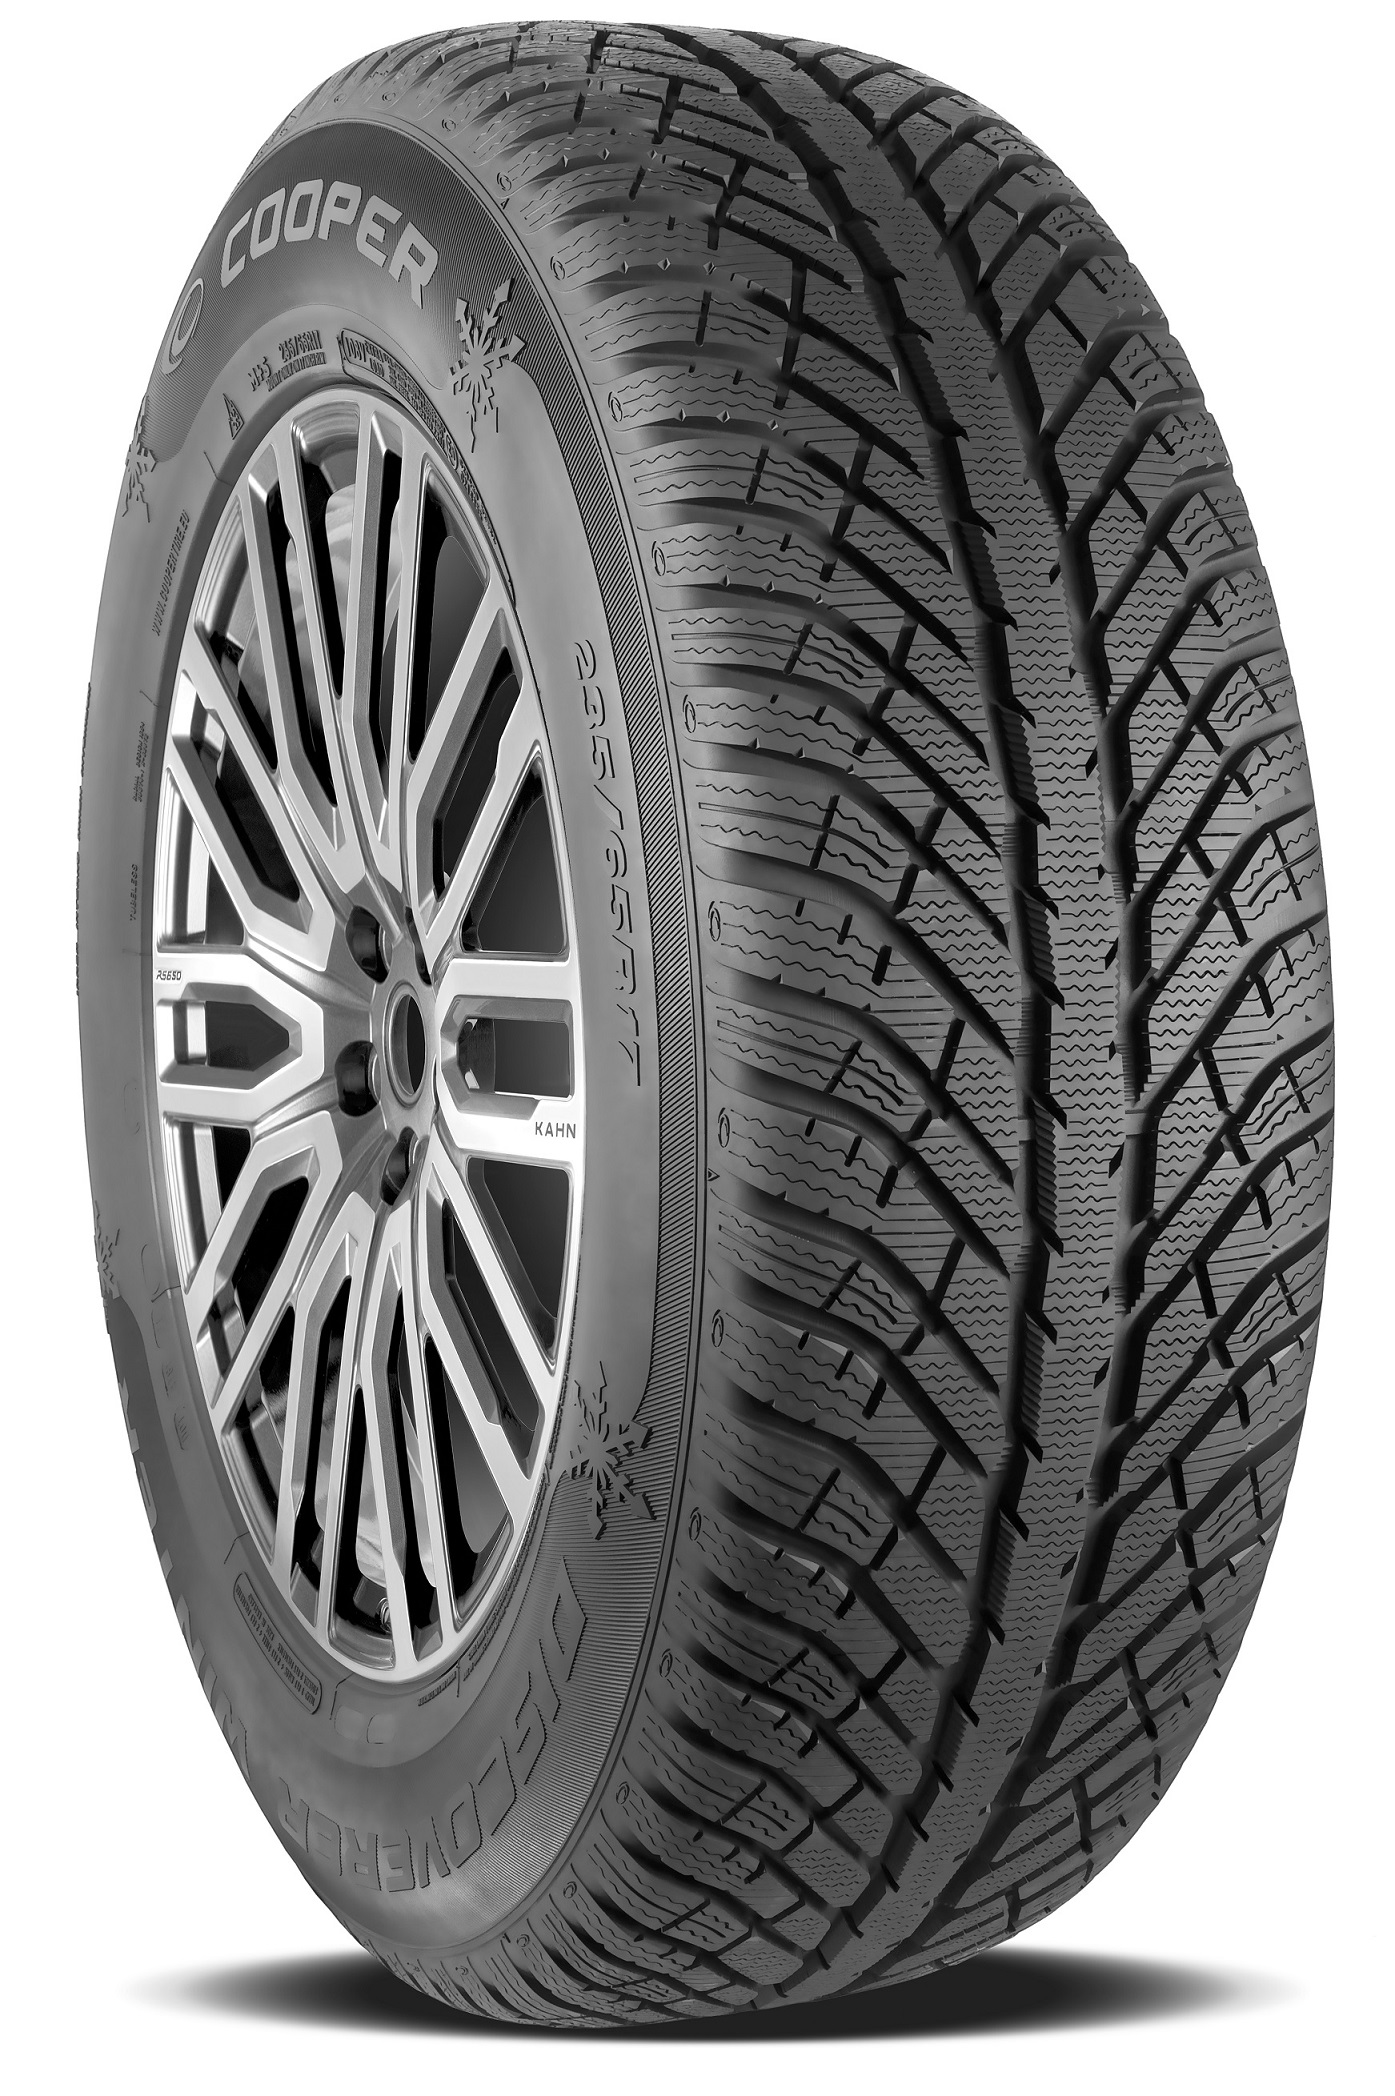 Gomme Nuove Cooper Tyres 245/45 R19 102V DISC.WINTER M+S pneumatici nuovi Invernale